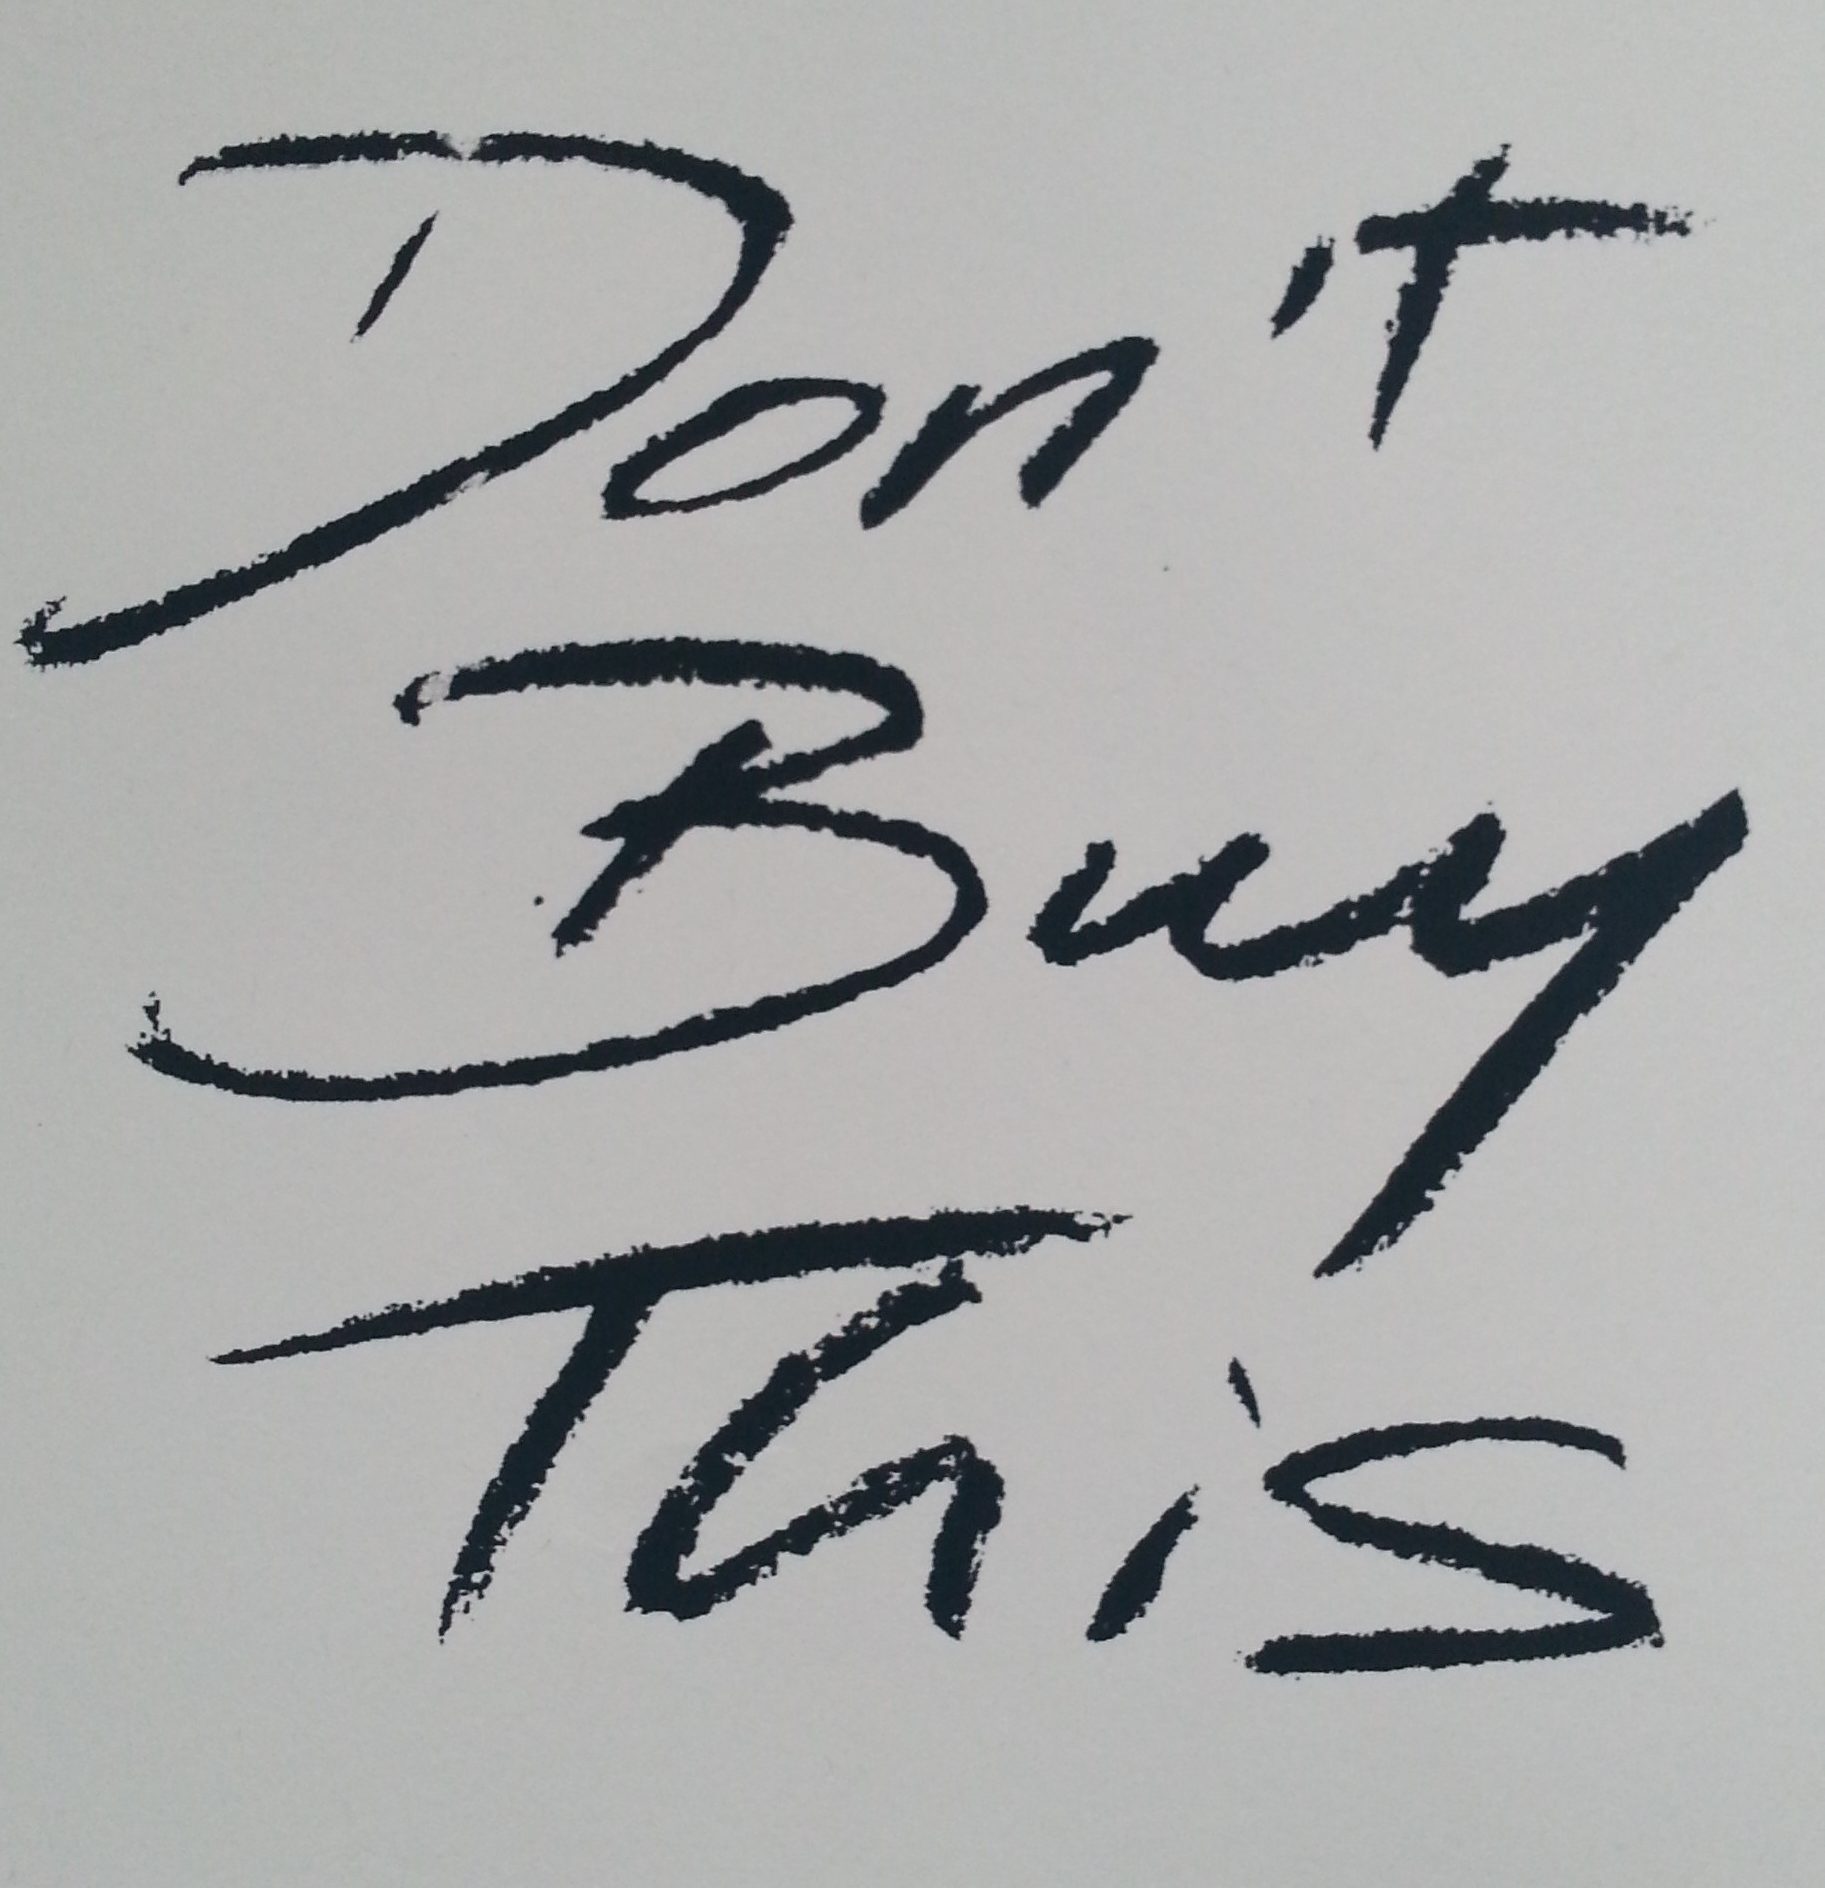 Don't Buy This, screen print on paper by Lee Devonish, 2016